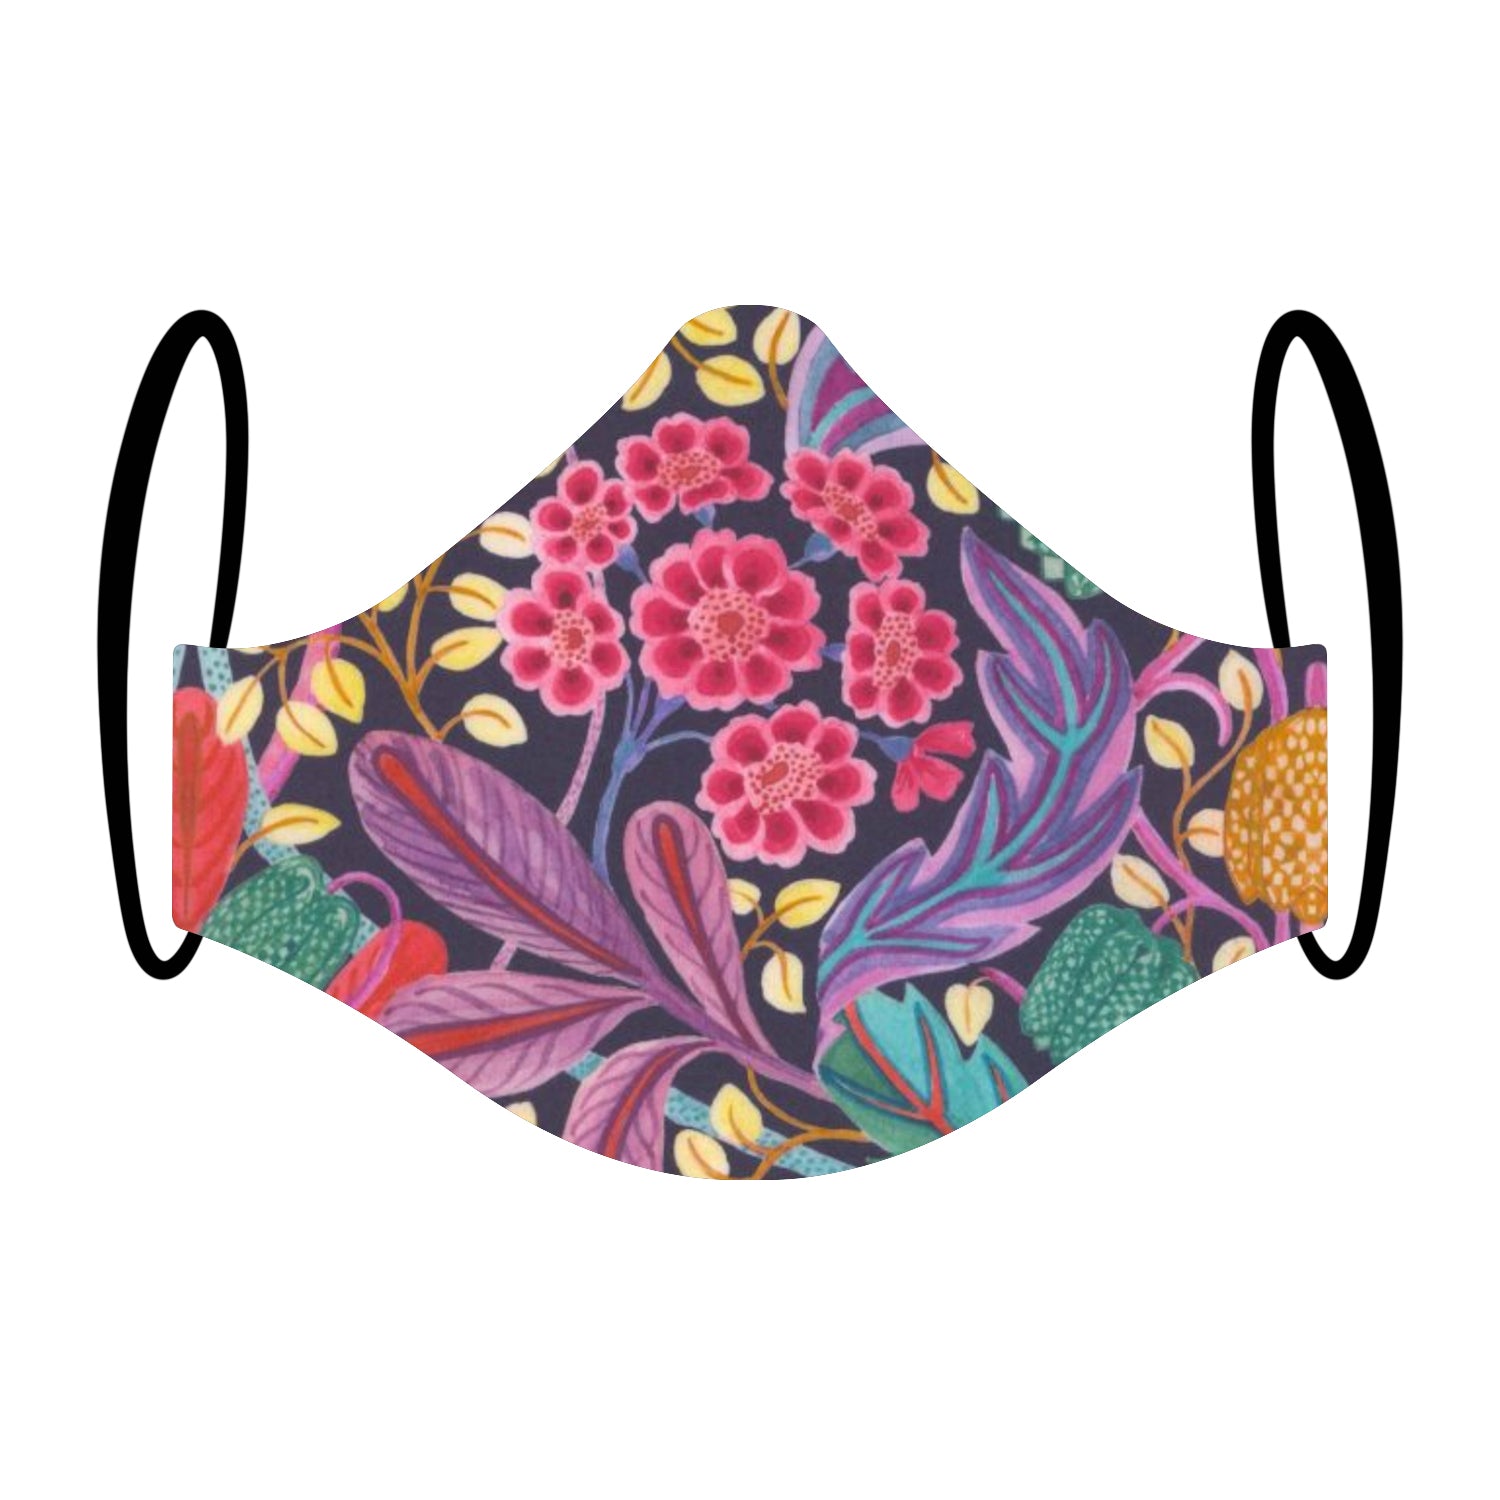 "Lockdown Goddess" Floral Face Mask featuring Liberty London Fabric Triple-layer Washable {Limited Edition}